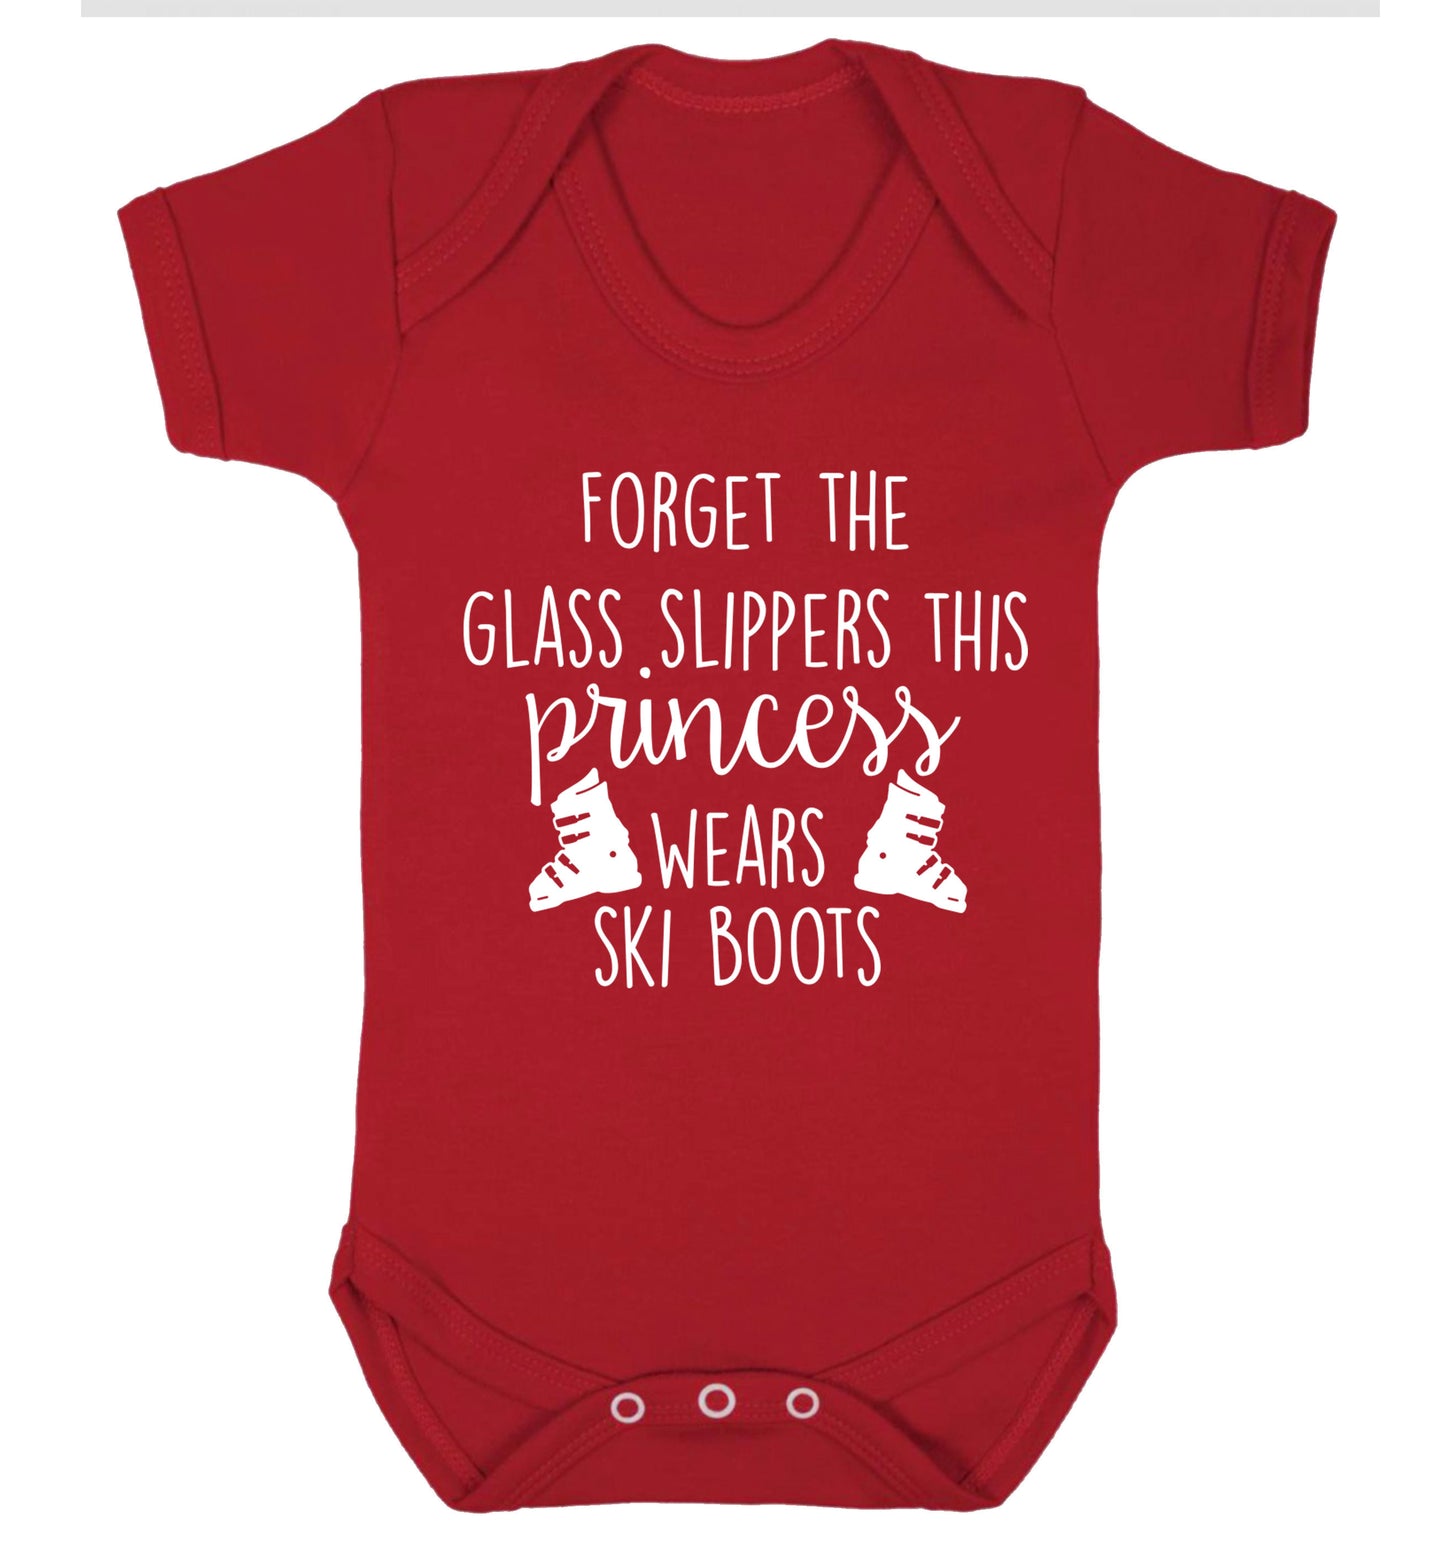 Forget the glass slippers this princess wears ski boots Baby Vest red 18-24 months